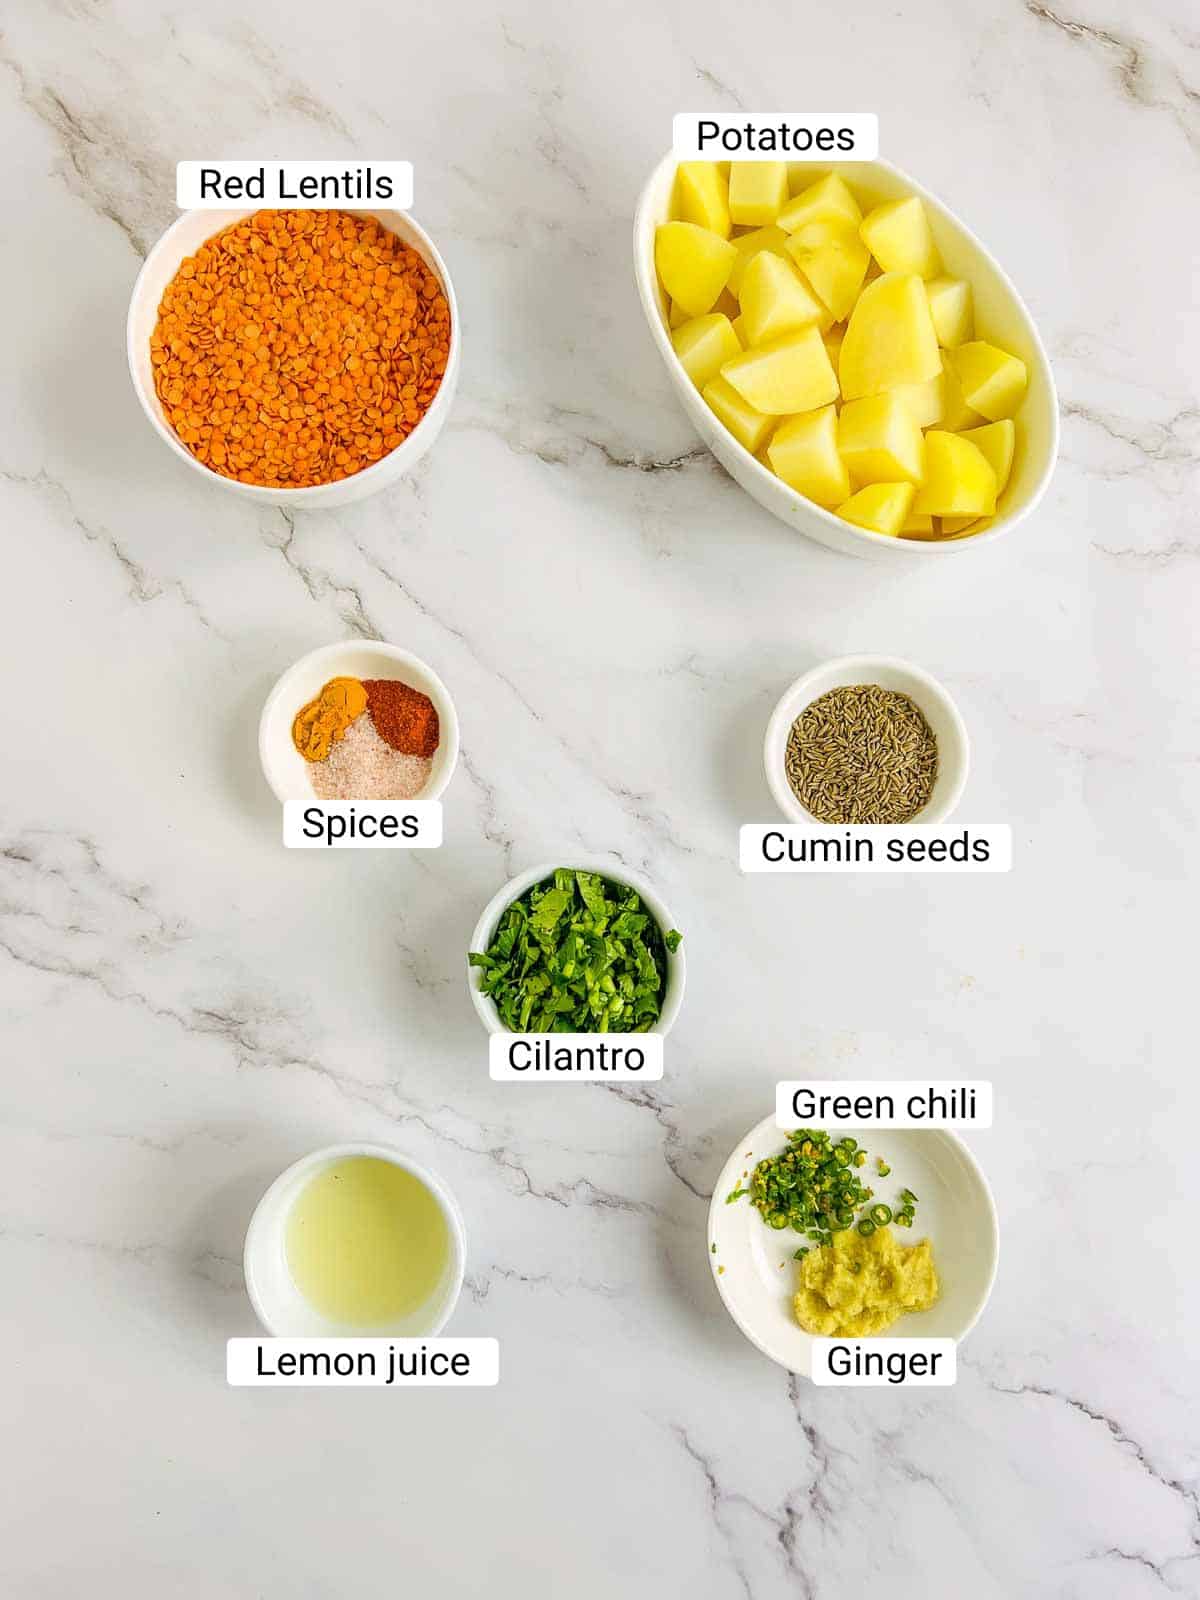 Ingredients to make red lentil pancakes with potatoes on a white surface.